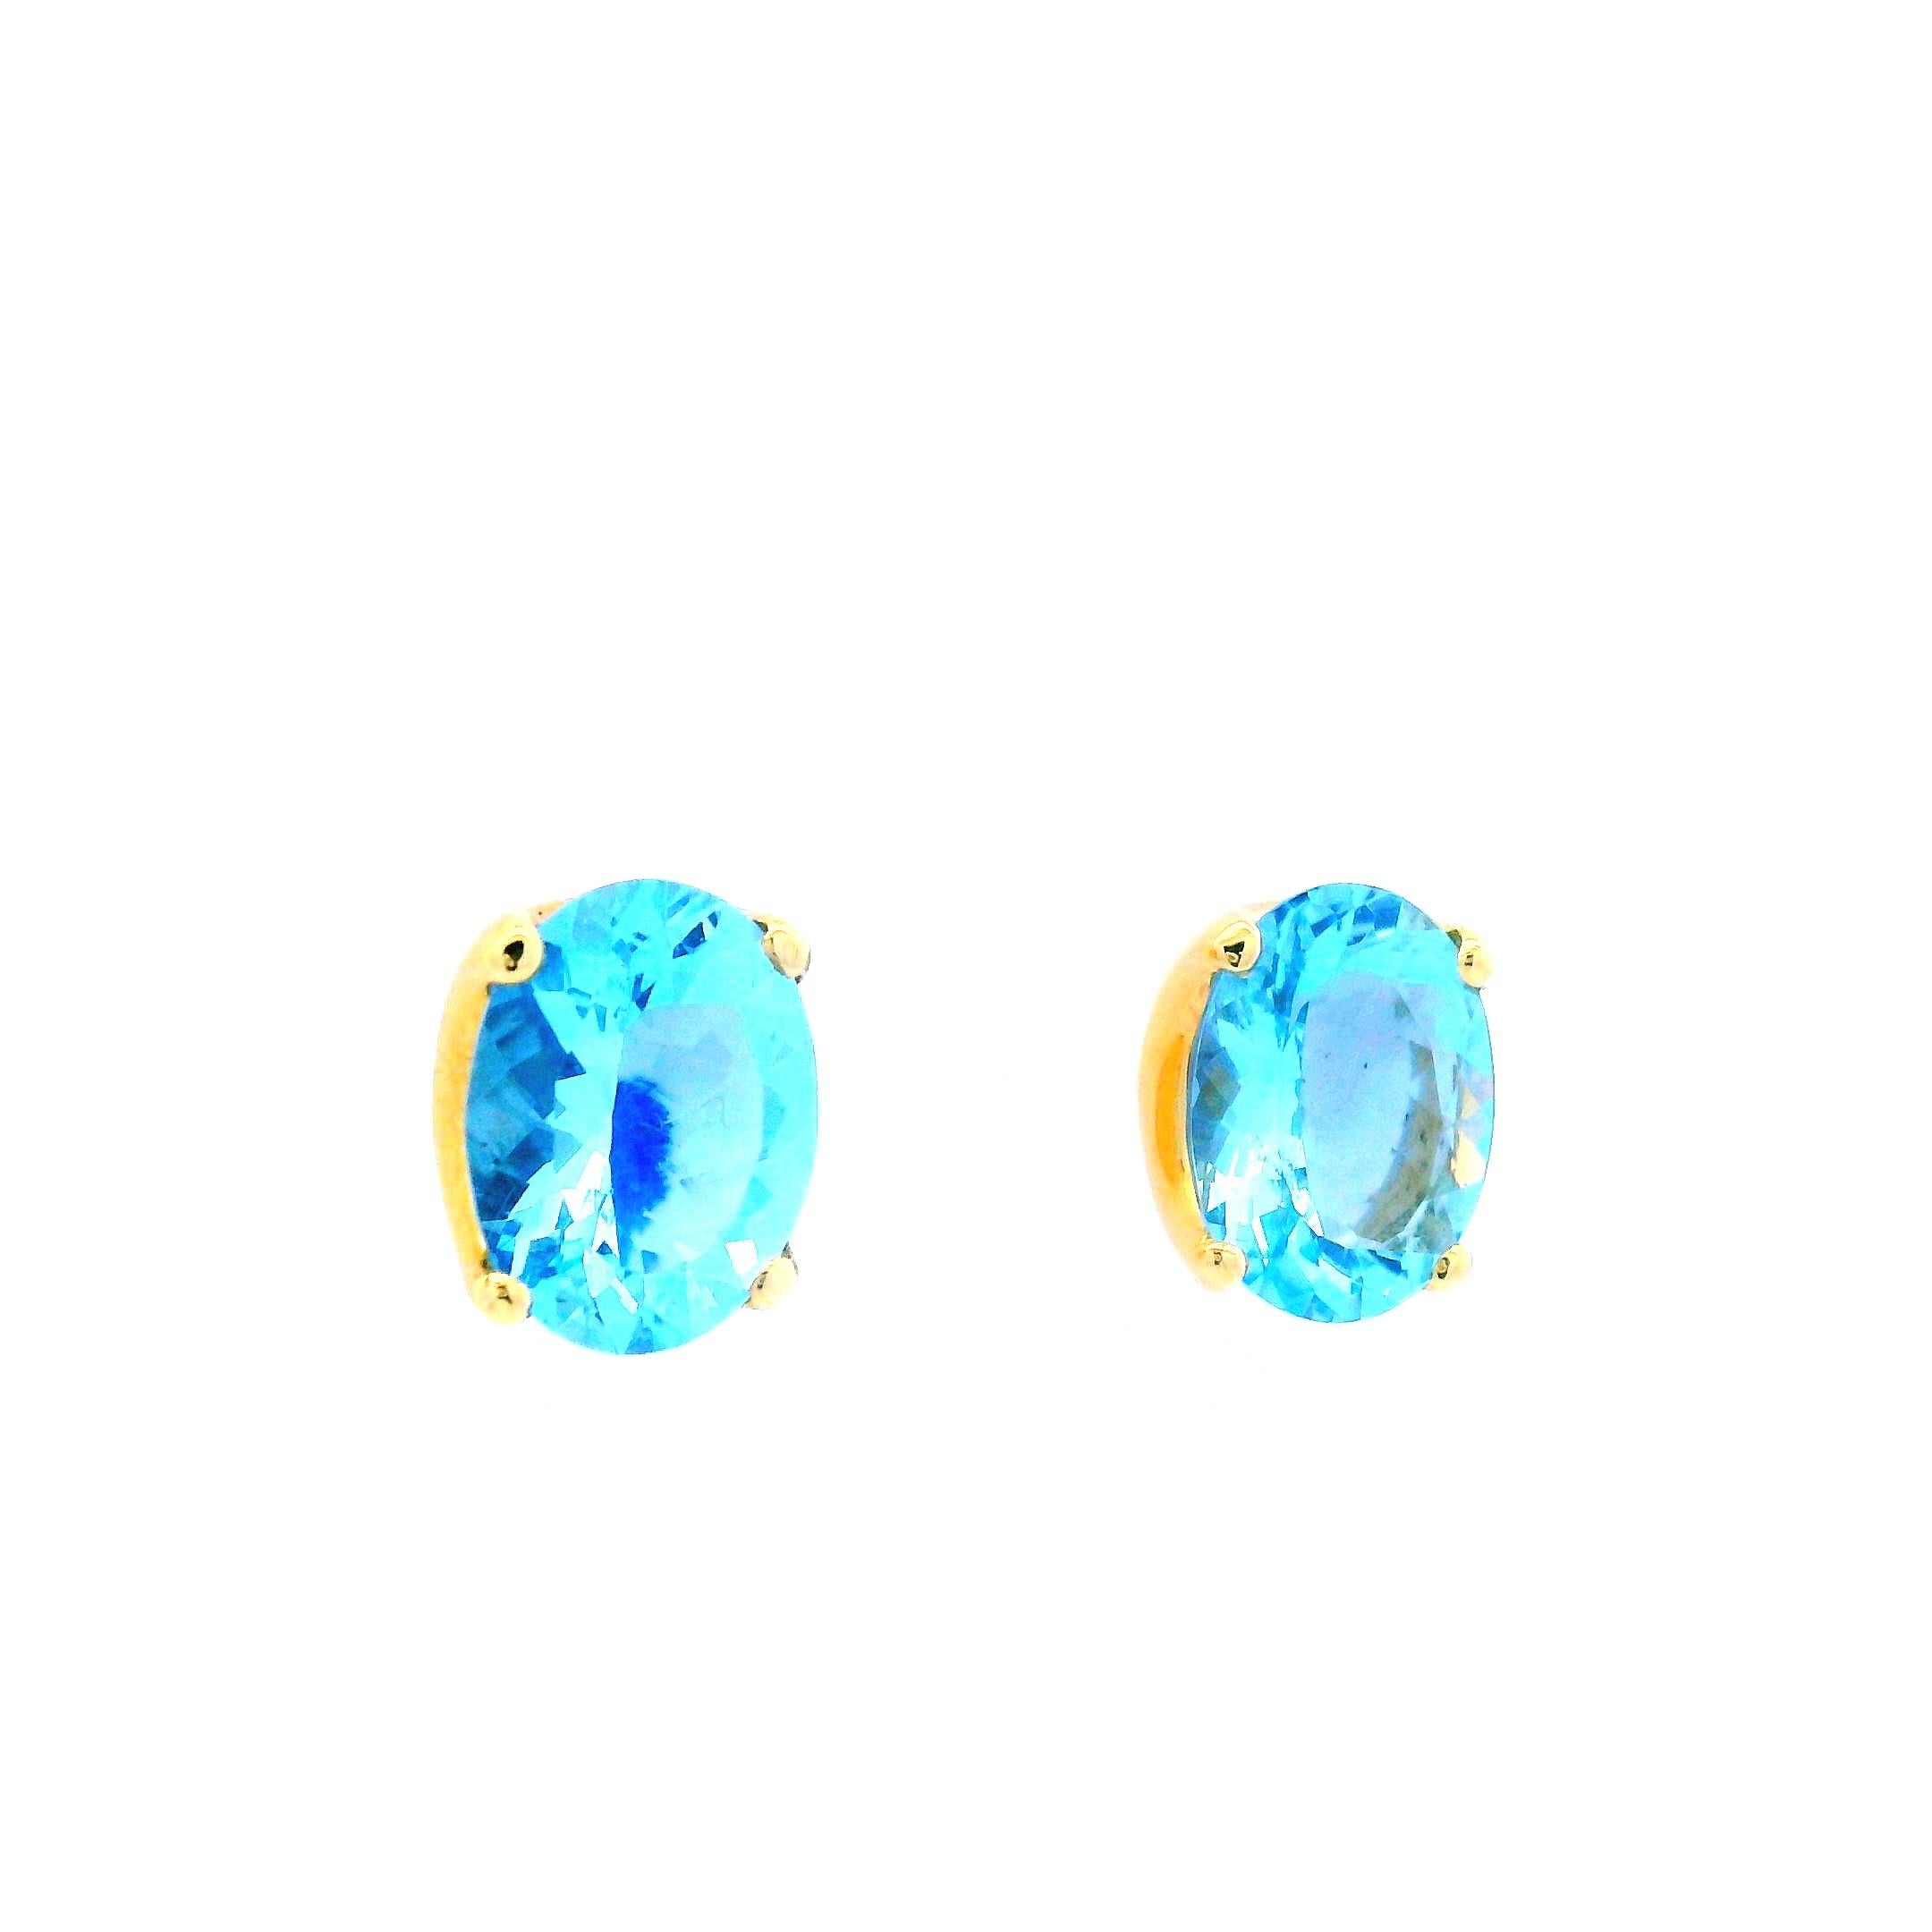 18K Yellow Gold H. Stern Aquamarine Stud Earrings  In Excellent Condition For Sale In Lexington, KY